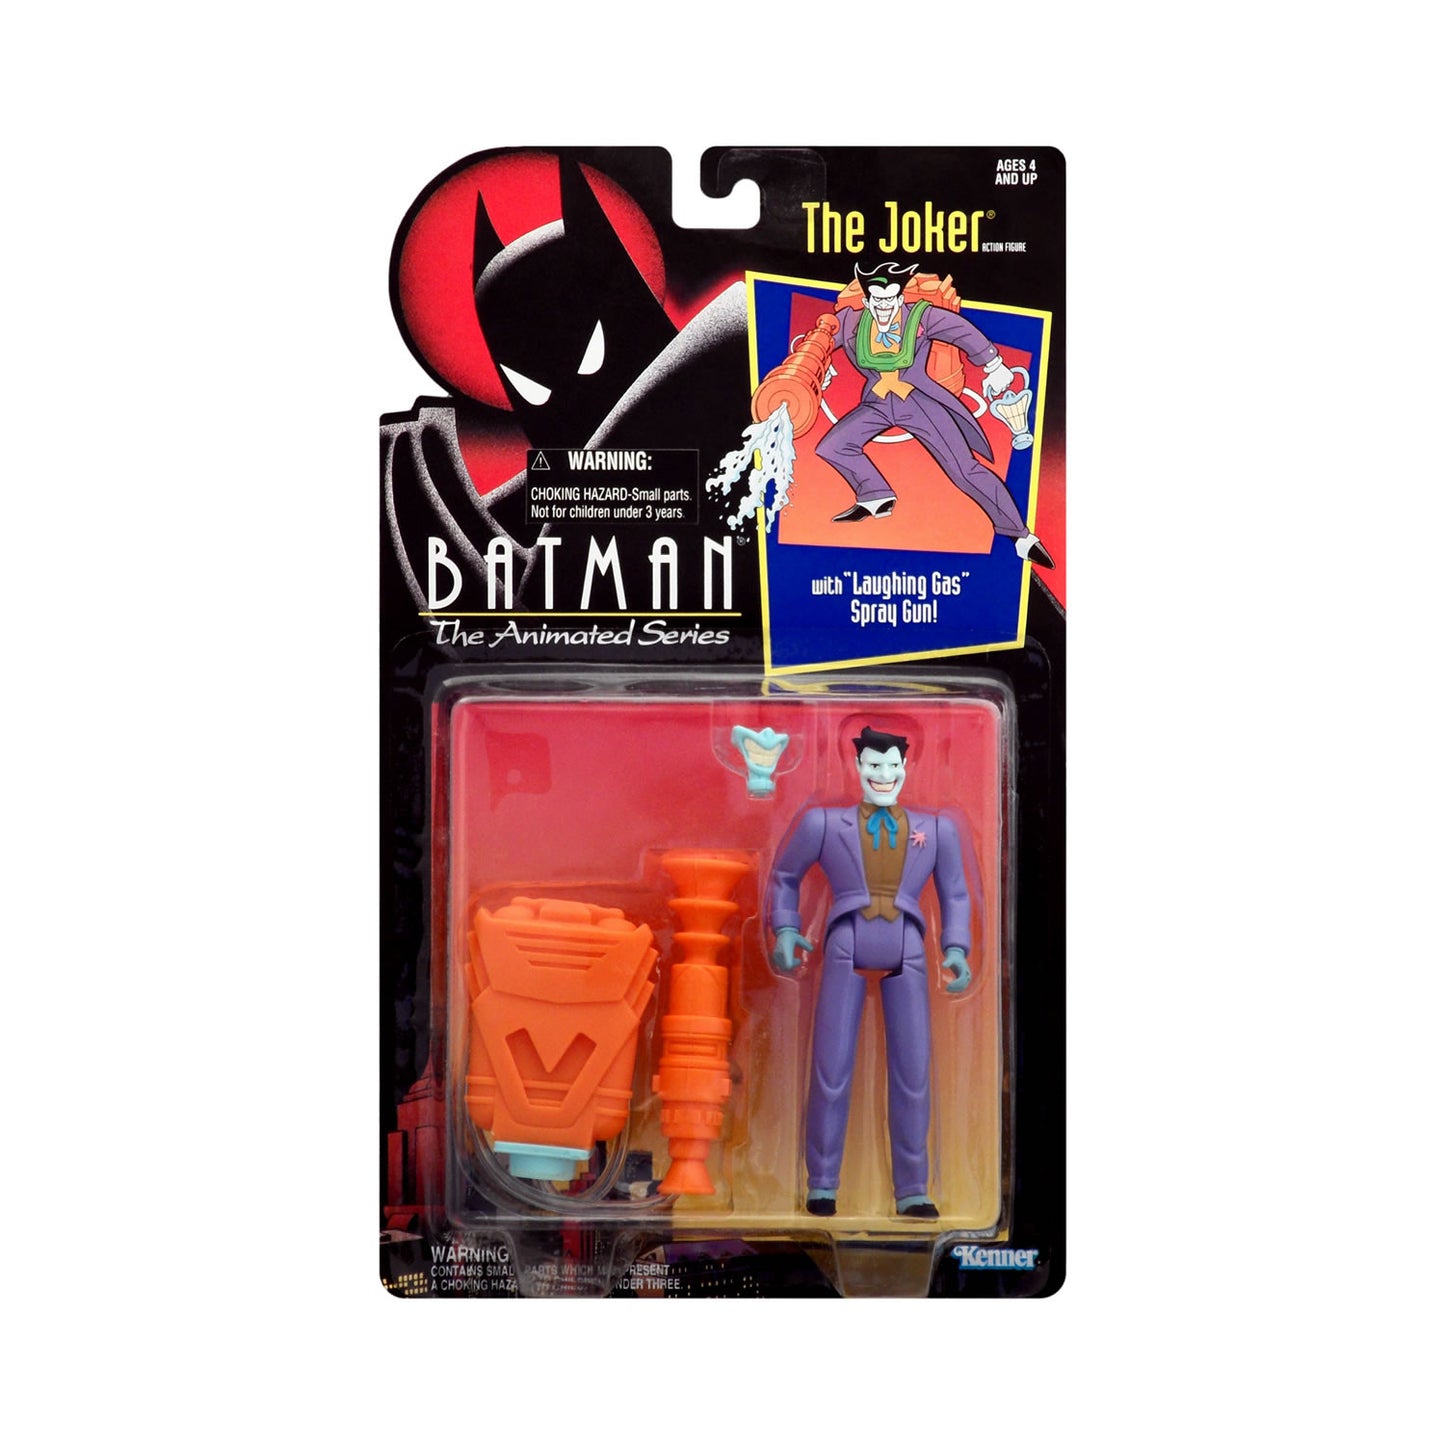 The Joker Action Figure from Batman: The Animated Series